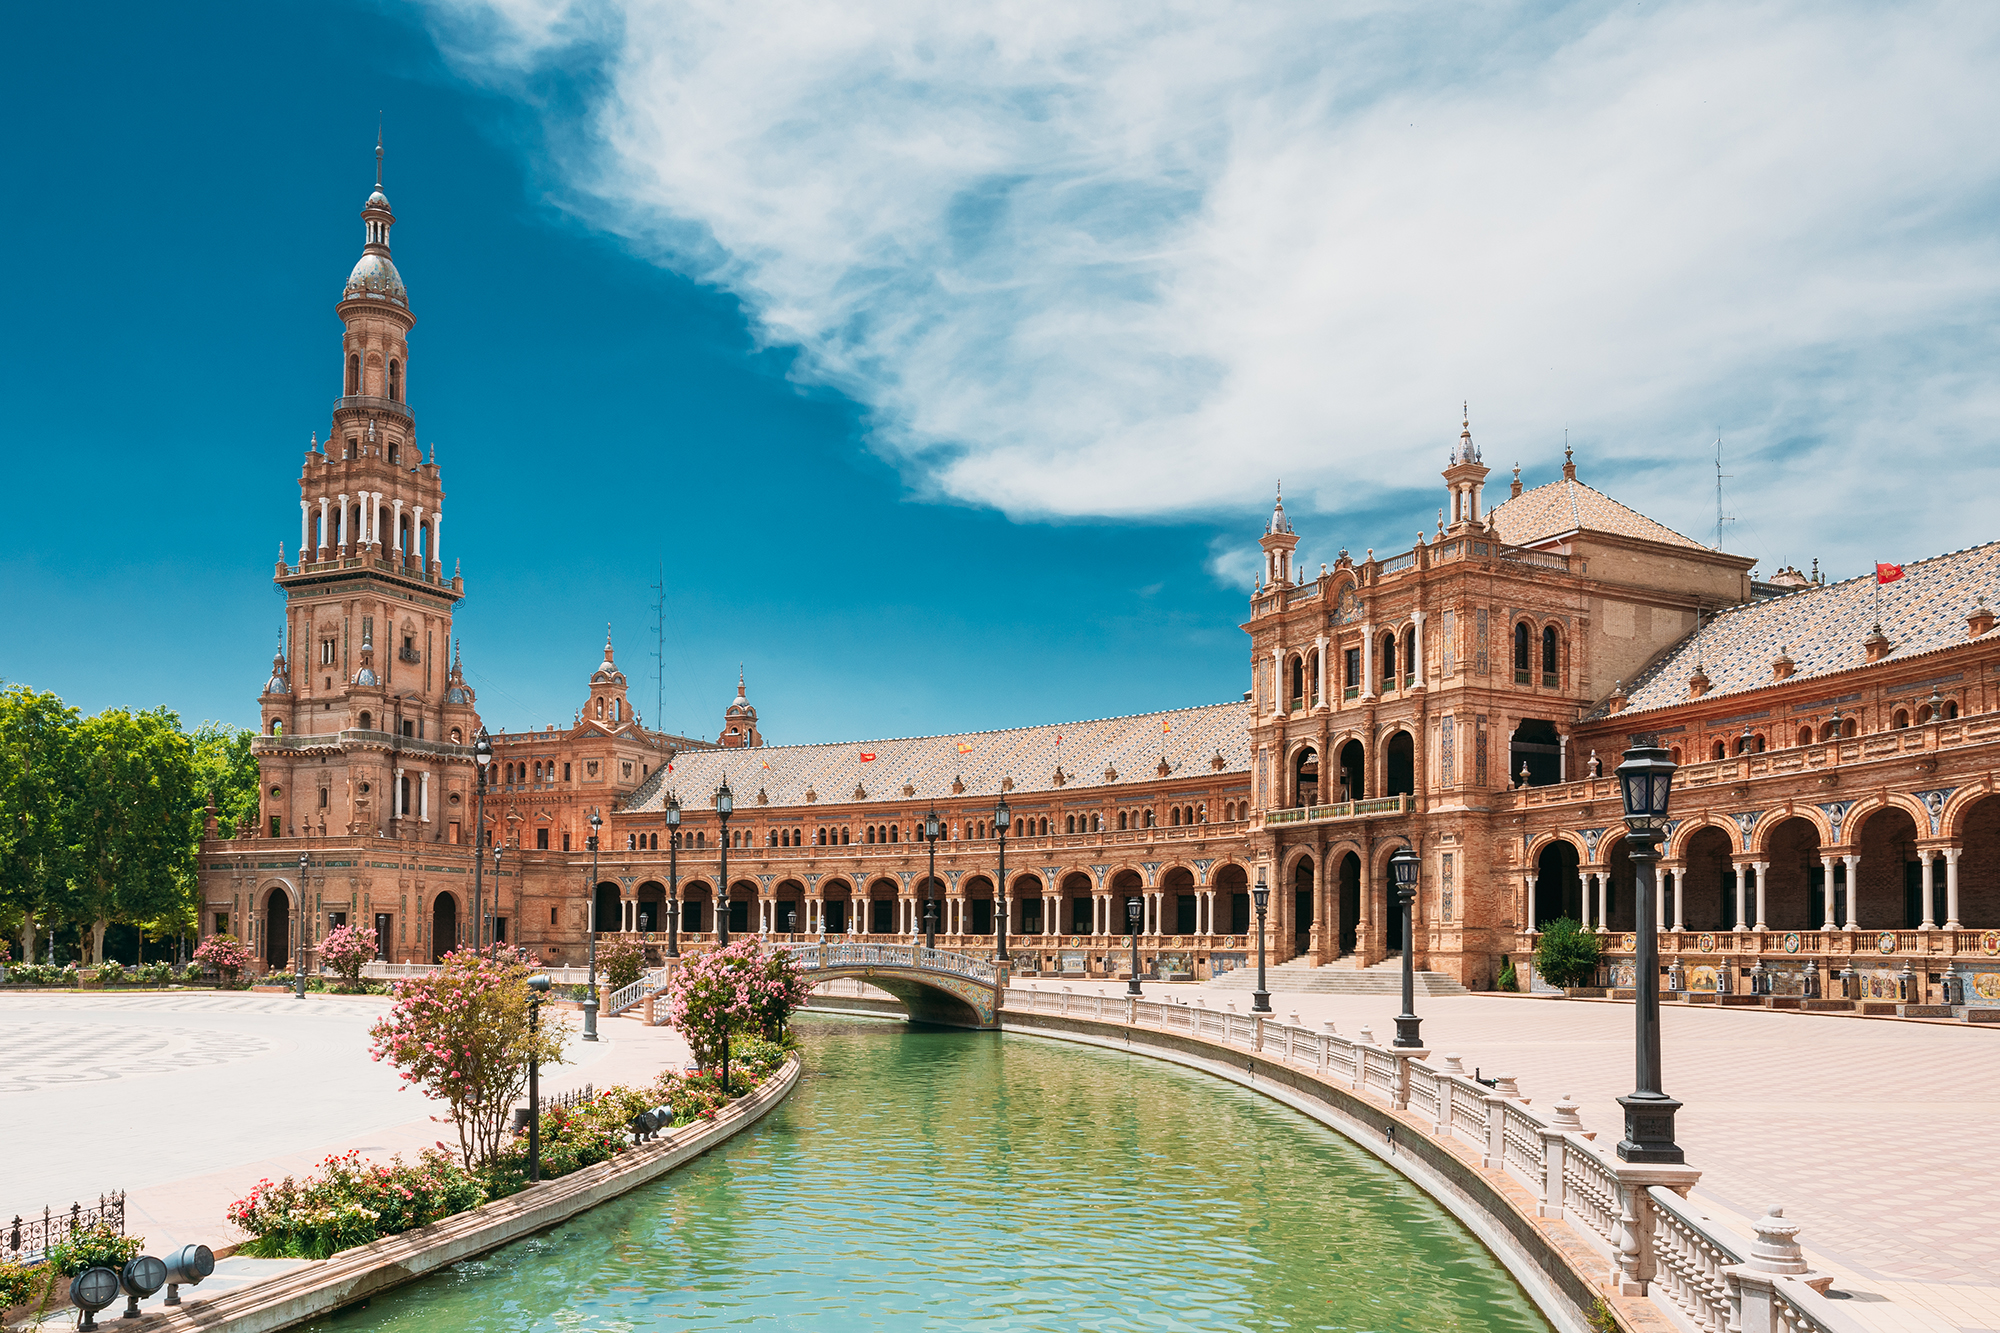 Spain Incentive Travel Guide: Three Can’t-Miss Destinations